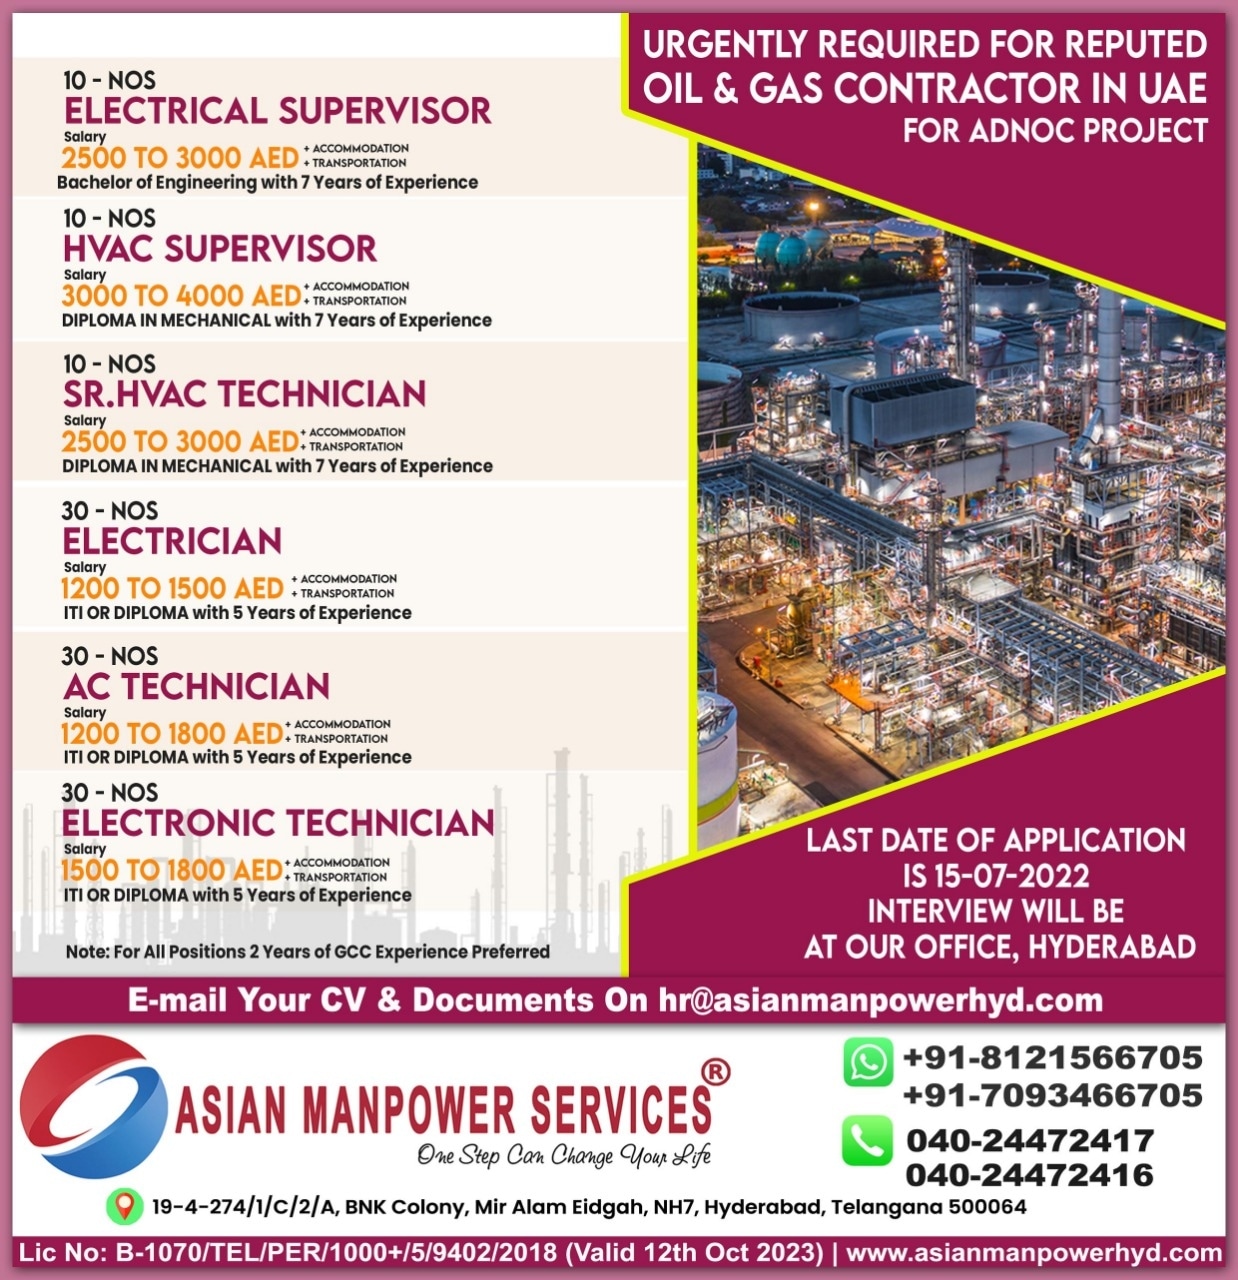 Urgently required for Adnoc Project in Abu Dhabi – last date of application is 15-07-2022, Interview will be in Hyderabad.